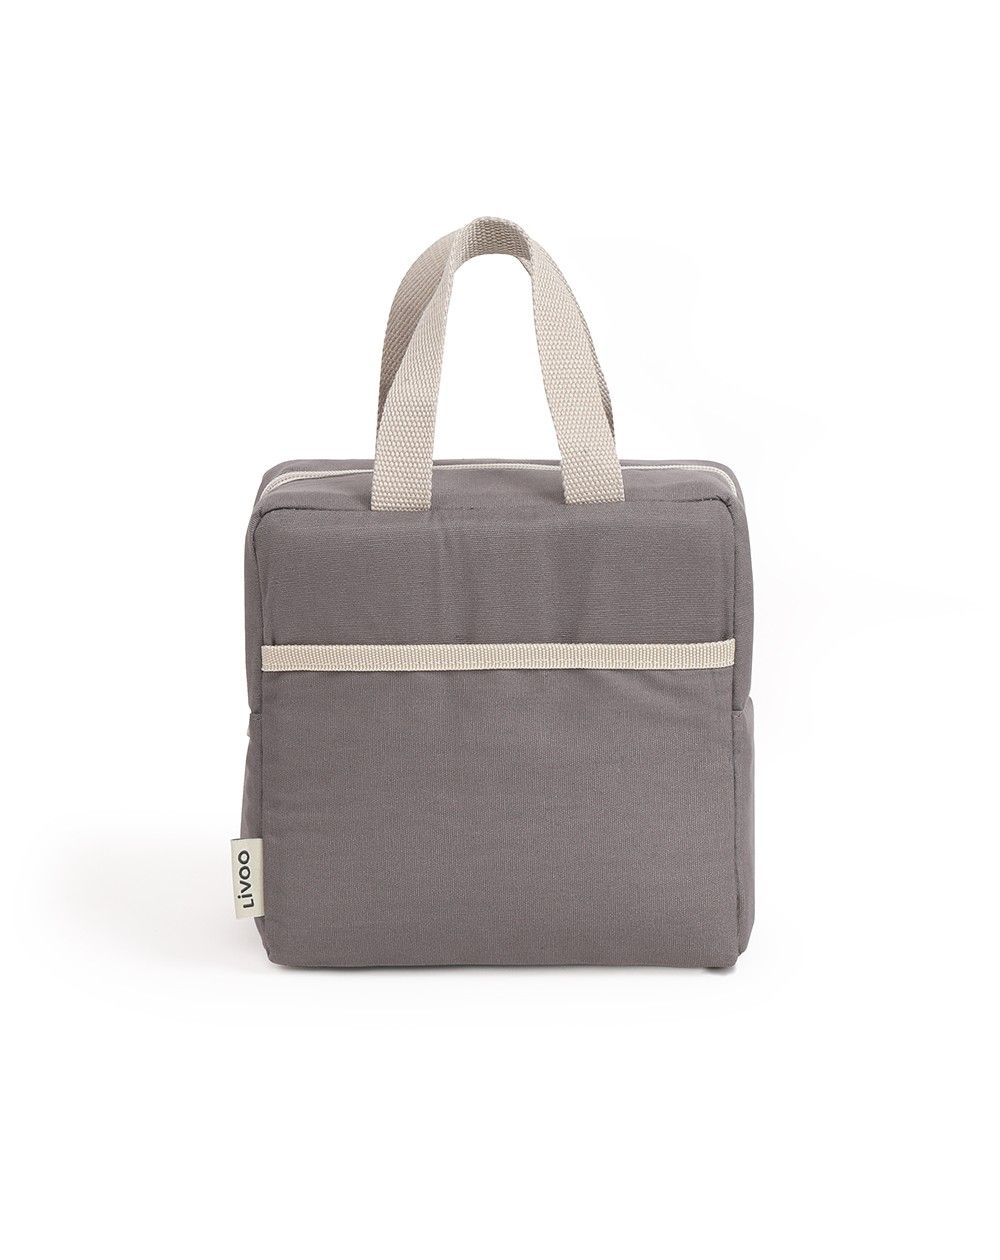 Sac isotherme pour lunch box